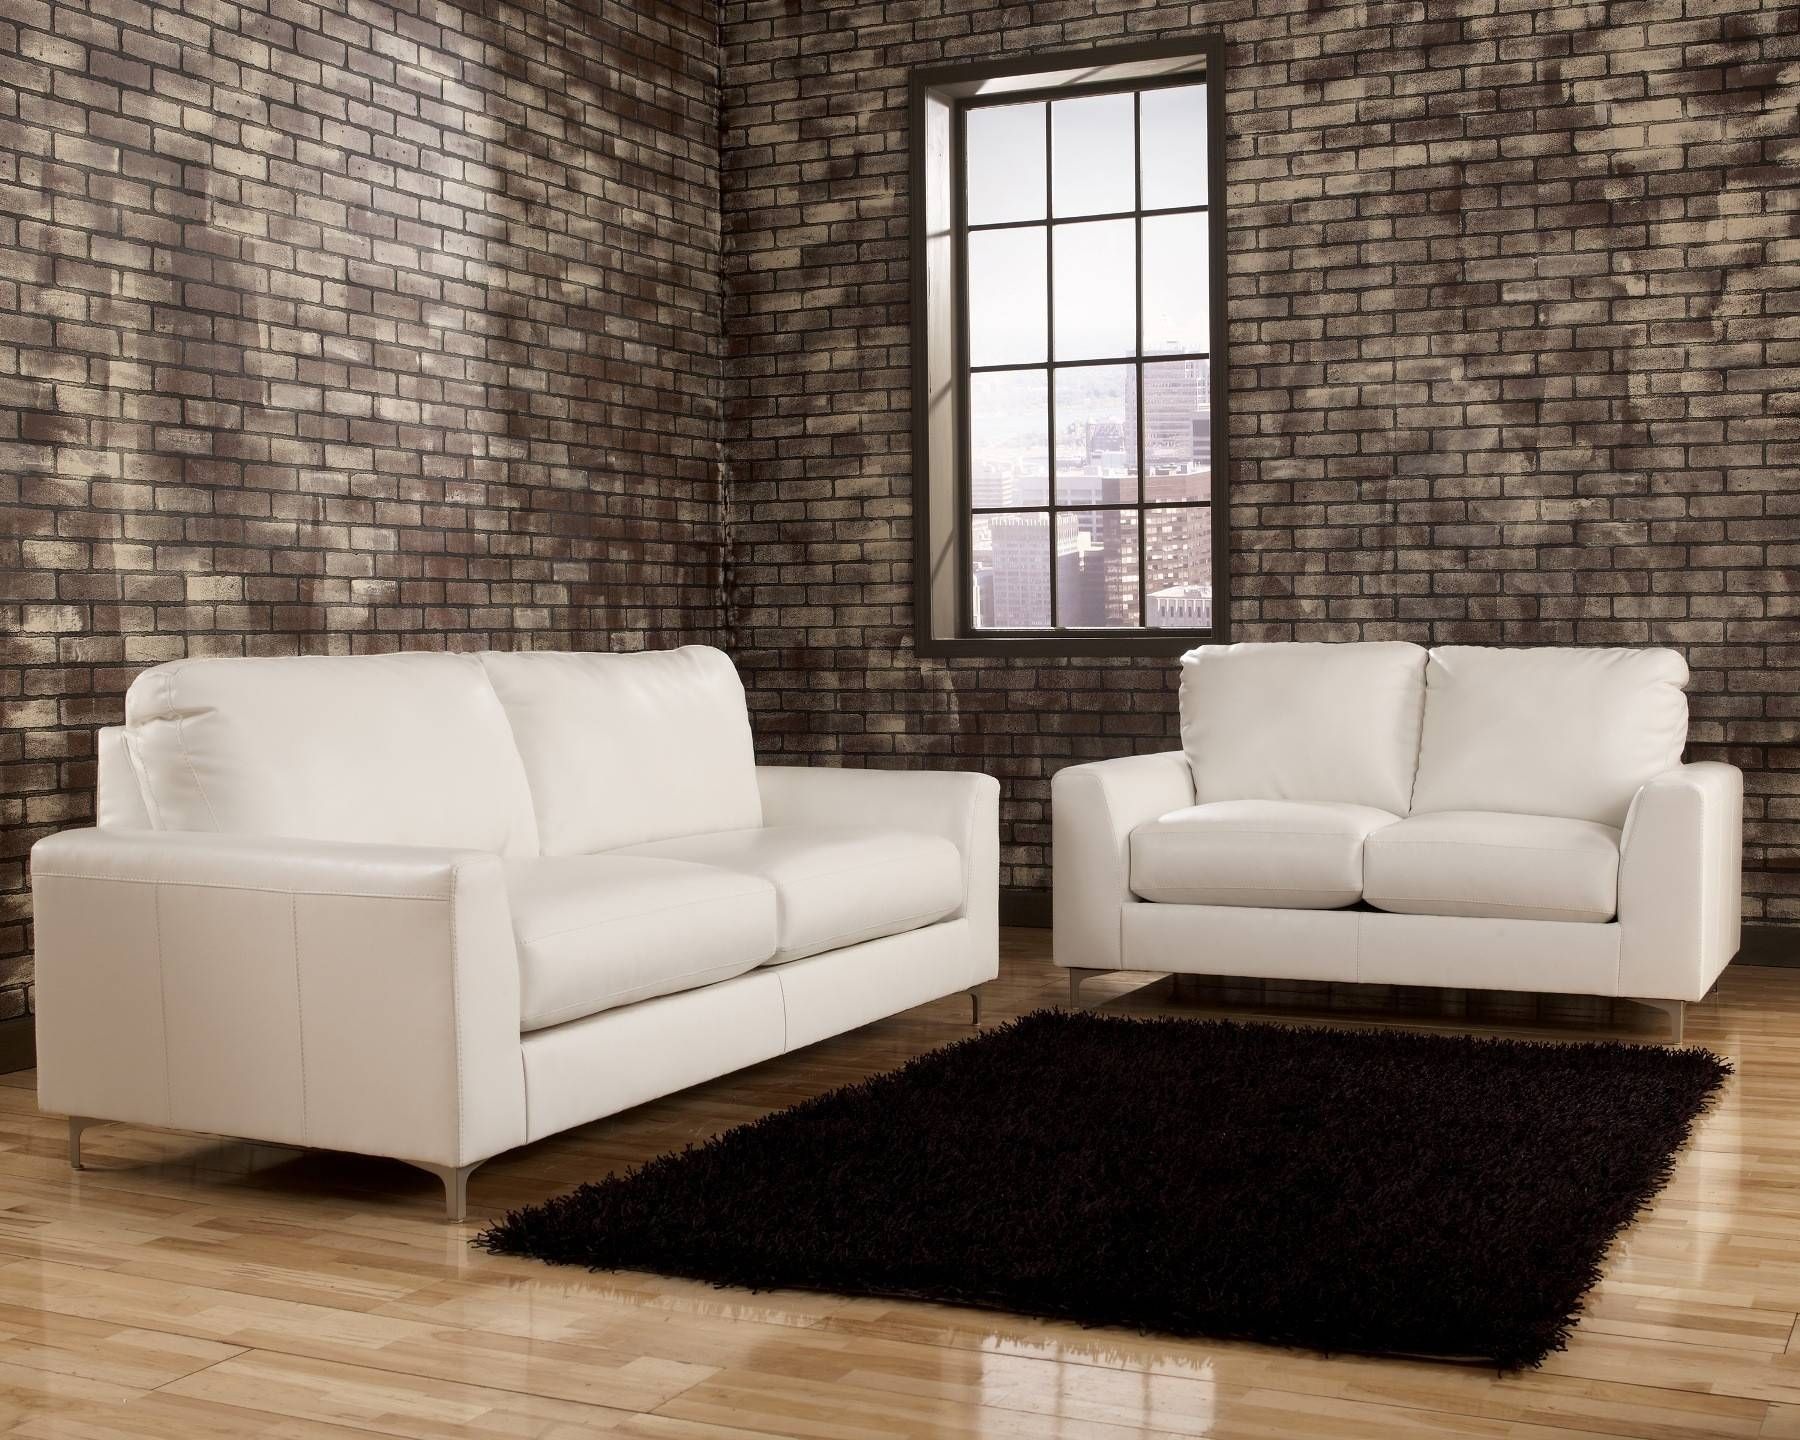 Sofa Chairs For Living Room | Spudm In Sofa Chairs For Living Room (View 6 of 15)